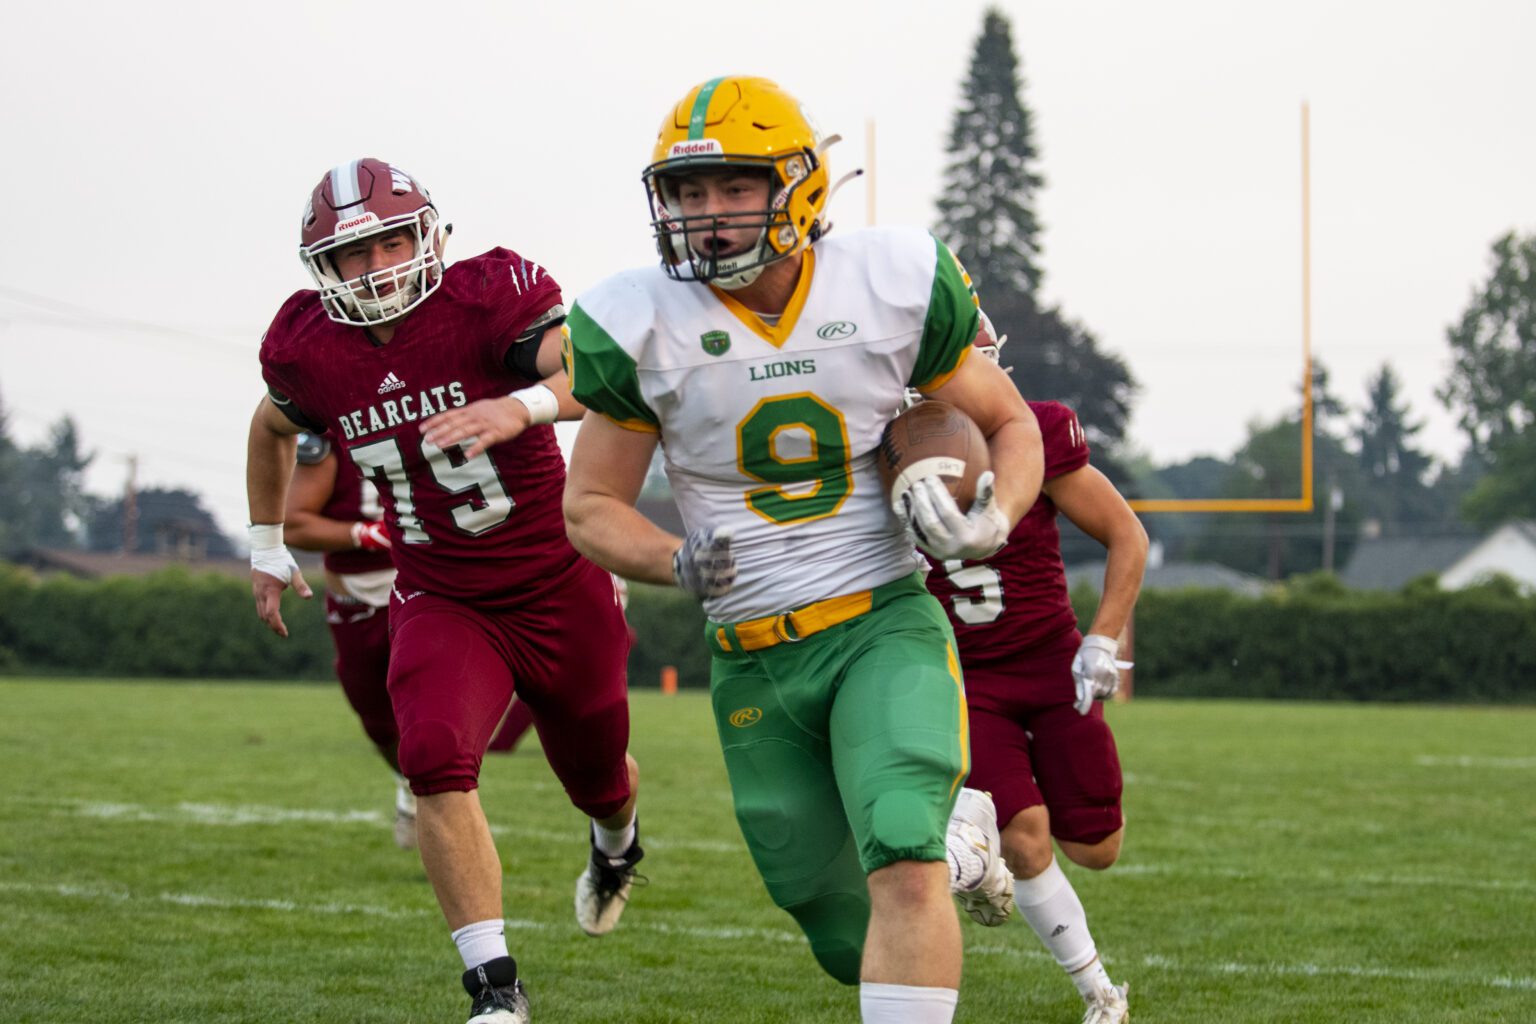 Lynden running back Campbell Nolte (9) takes off down the sideline as players from the opposing team chase him from behind.